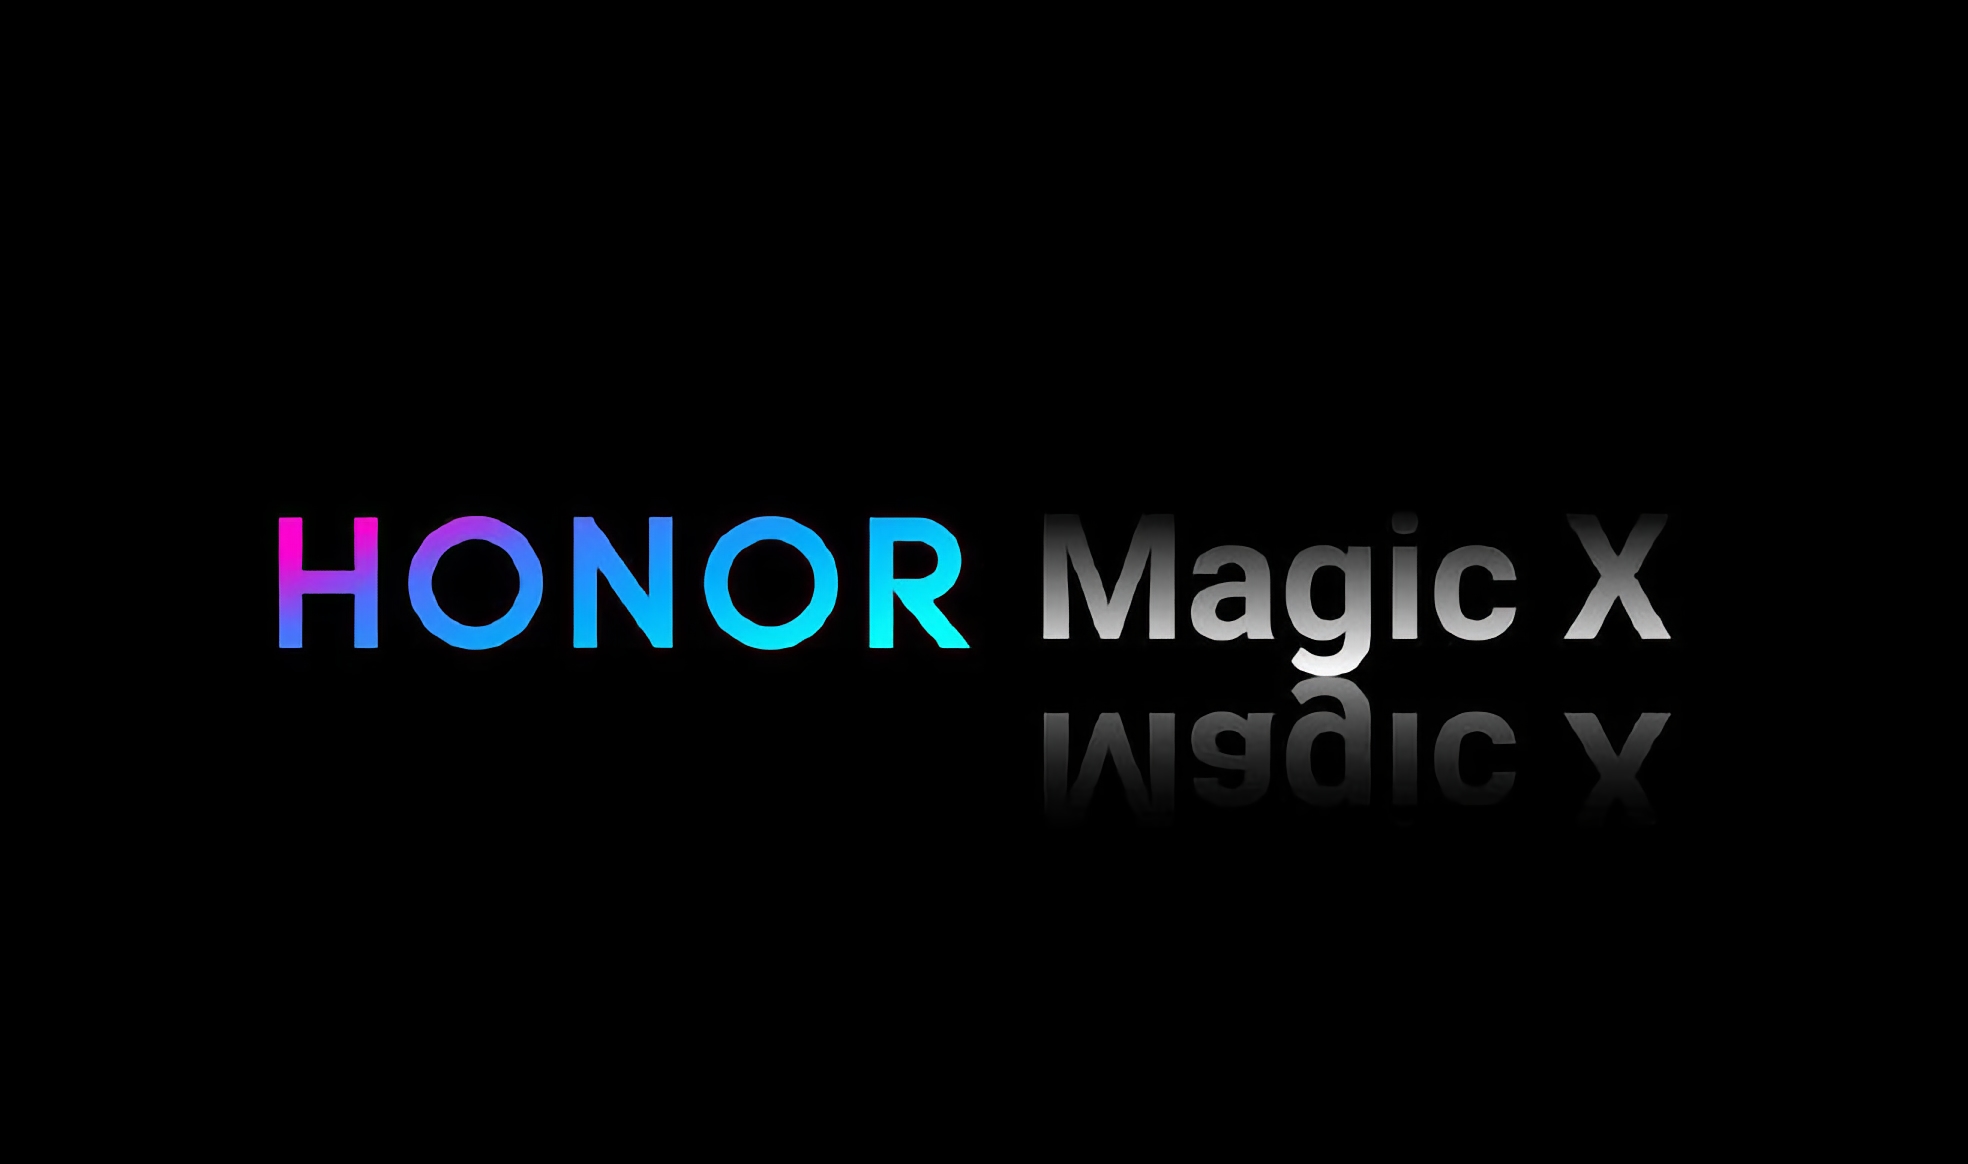 Insider: Honor's first foldable smartphone will be called Magic X and will be released before the end of this year